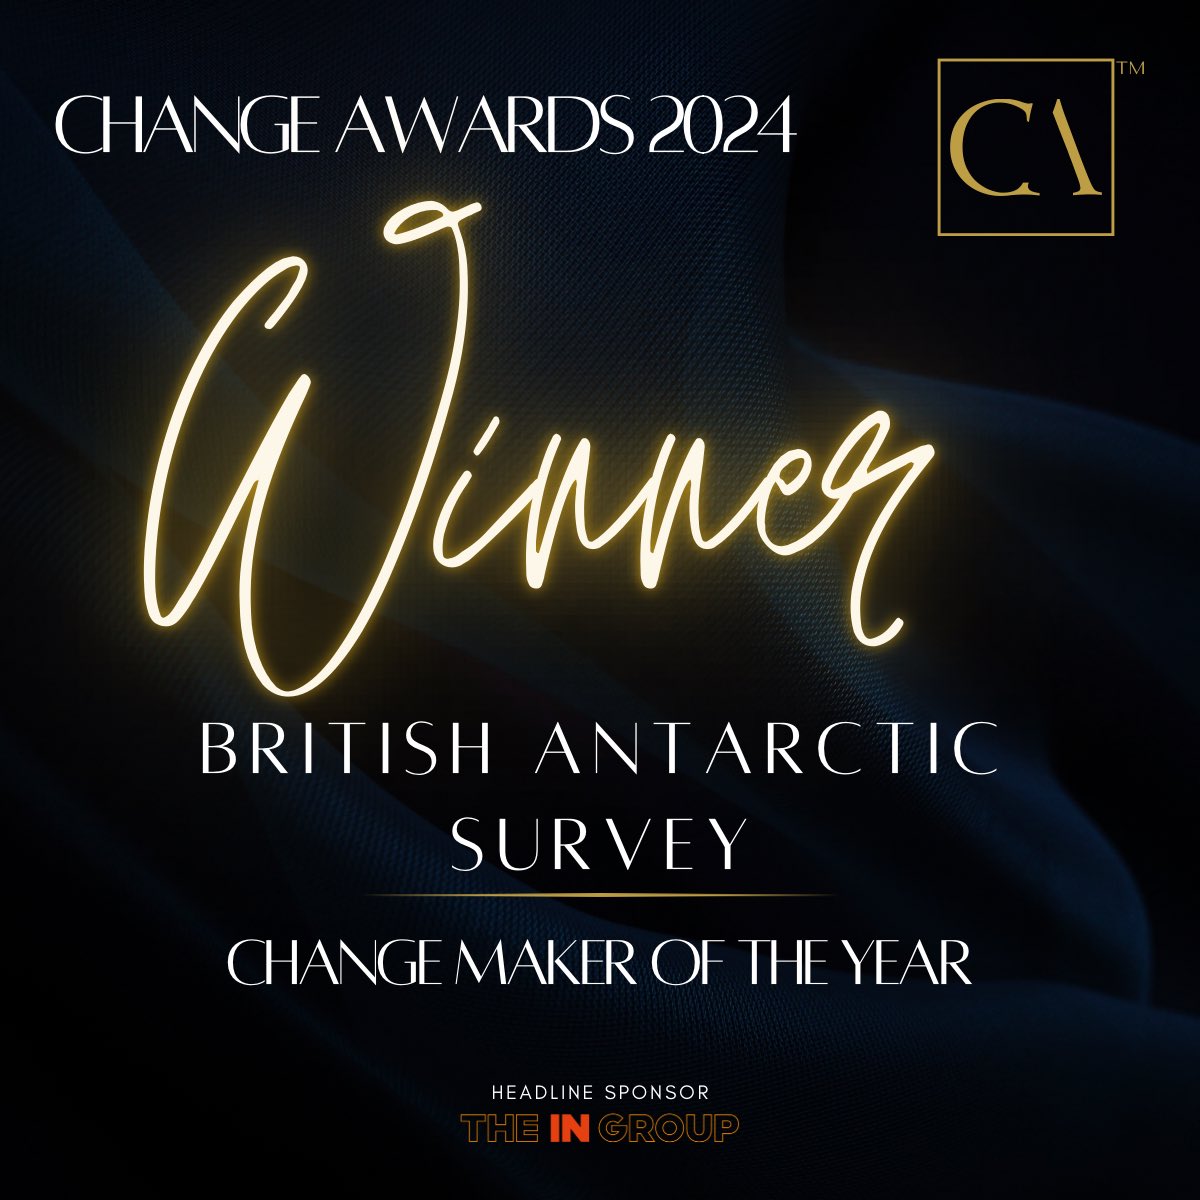 Congratulations to @BAS_News for winning the Change Maker of the Year Award!